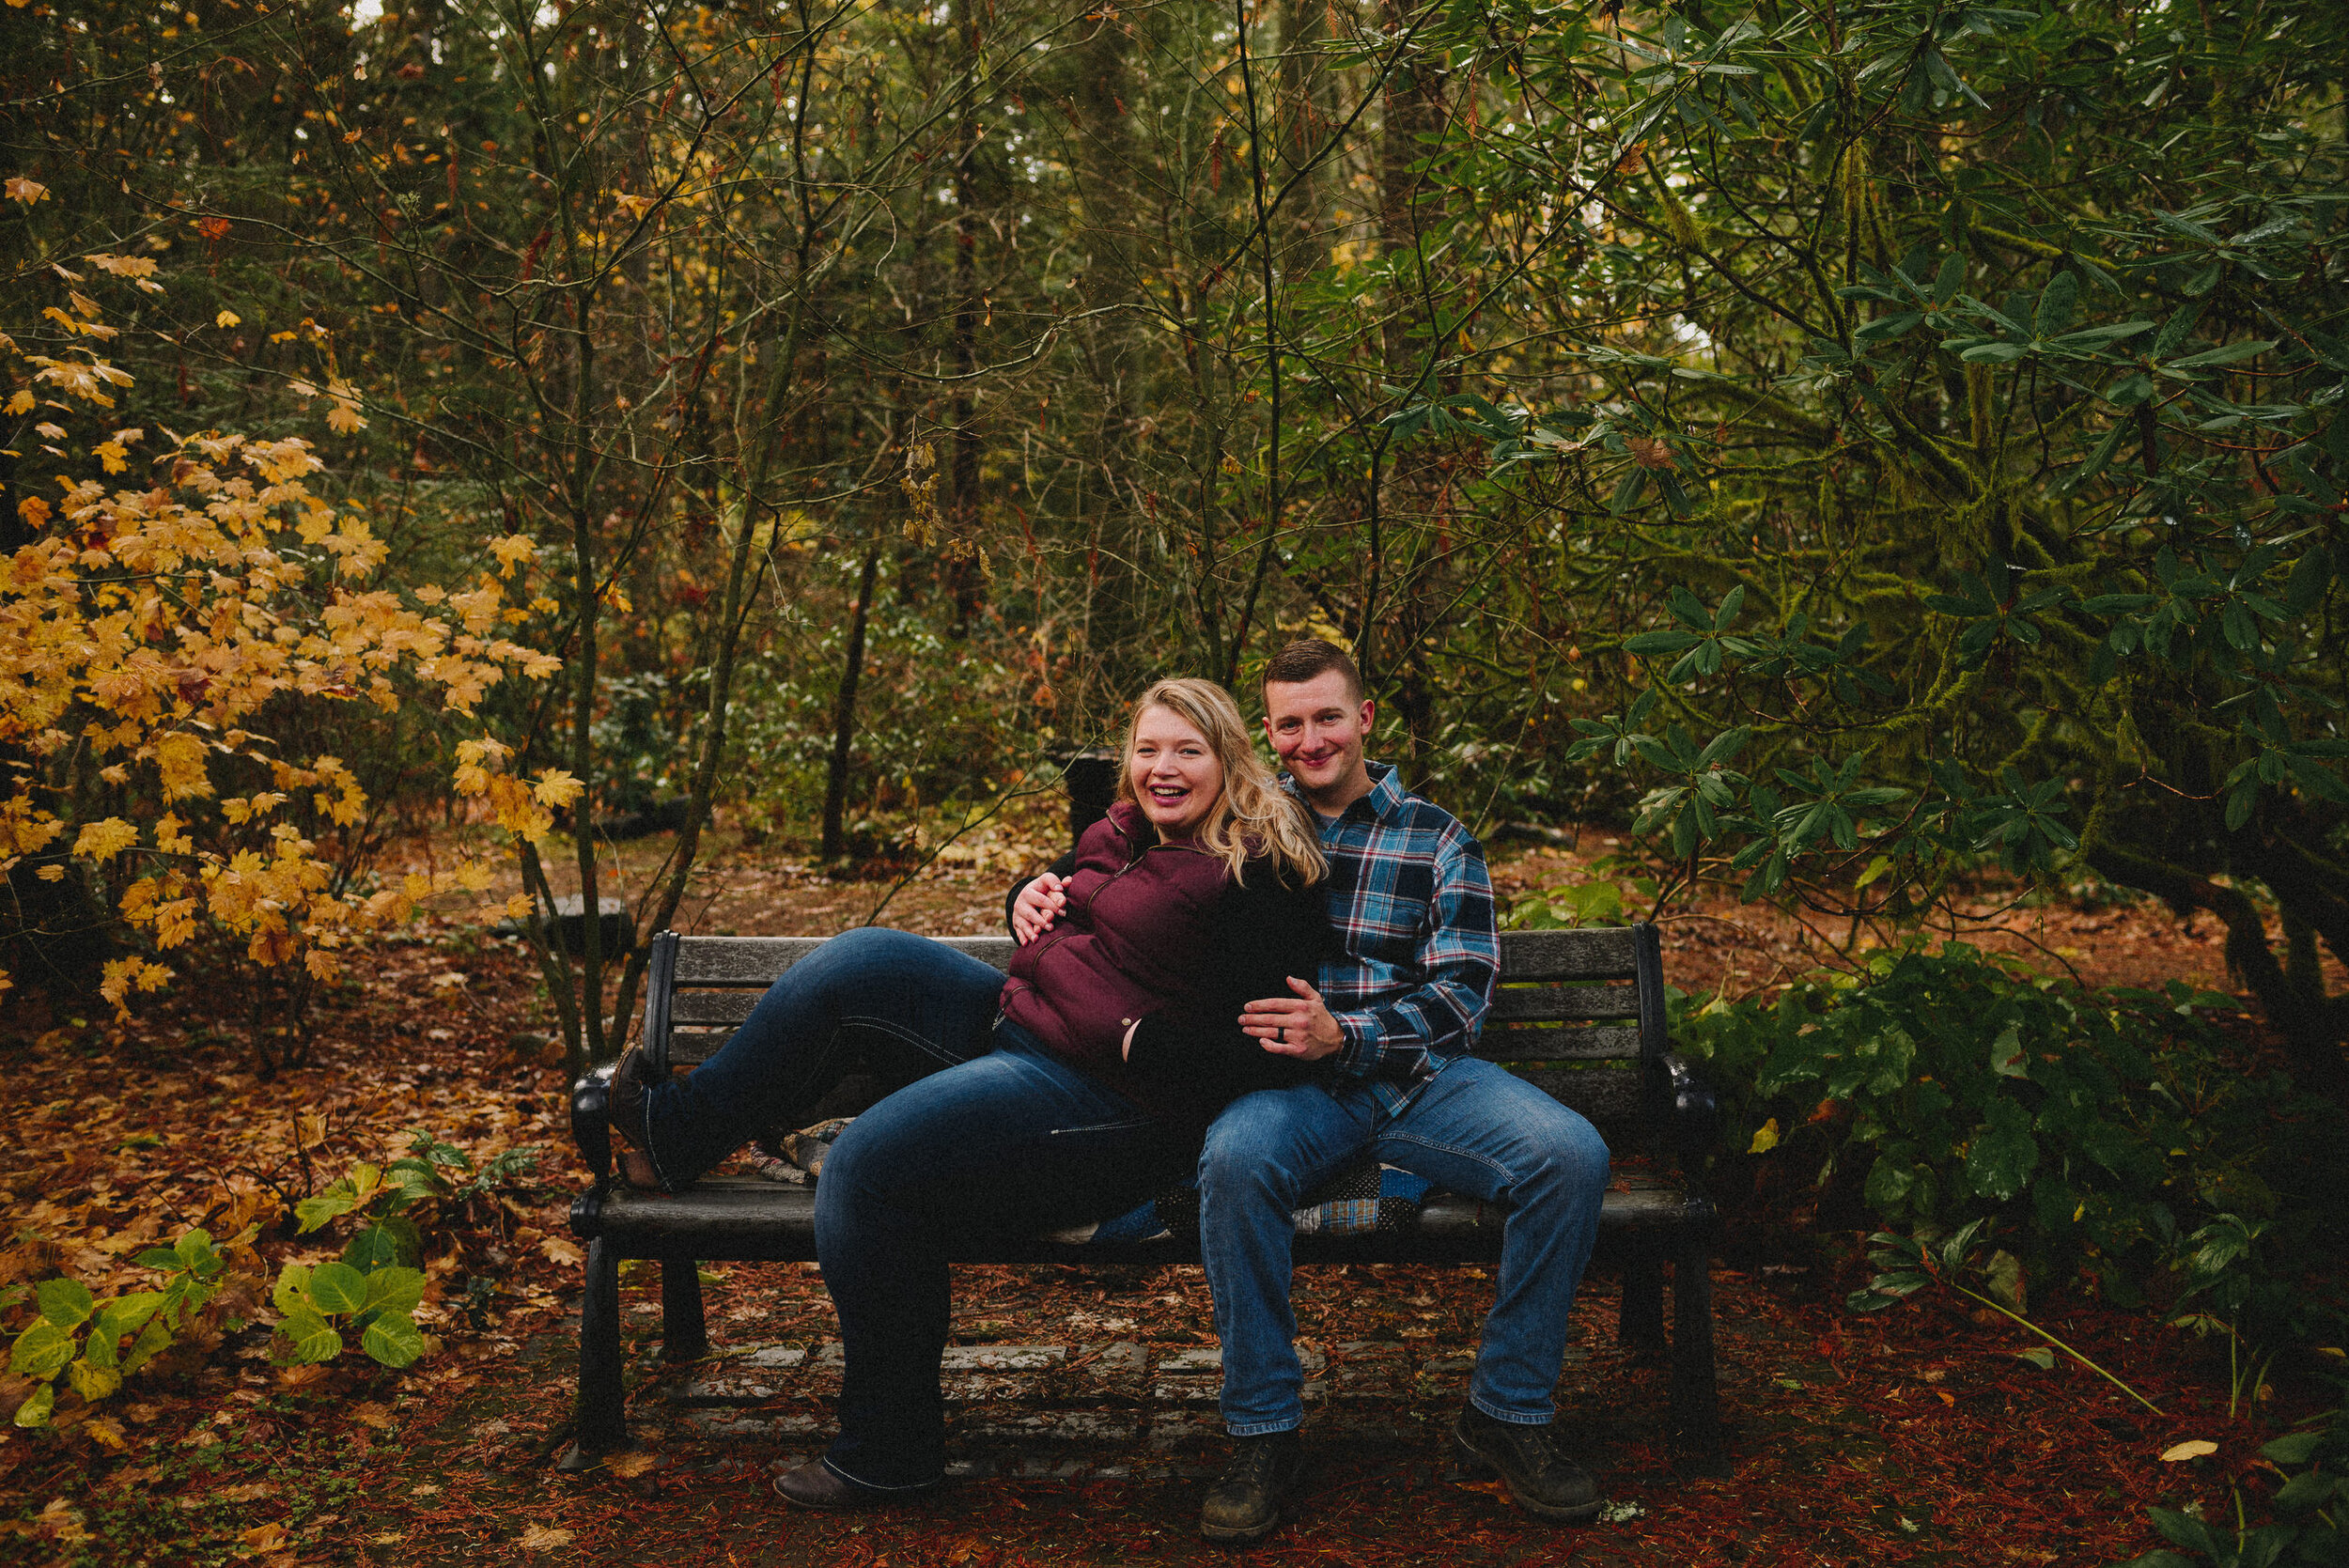 priest-point-park-couples-session-olympia-washington-way-up-north-photography (235).jpg